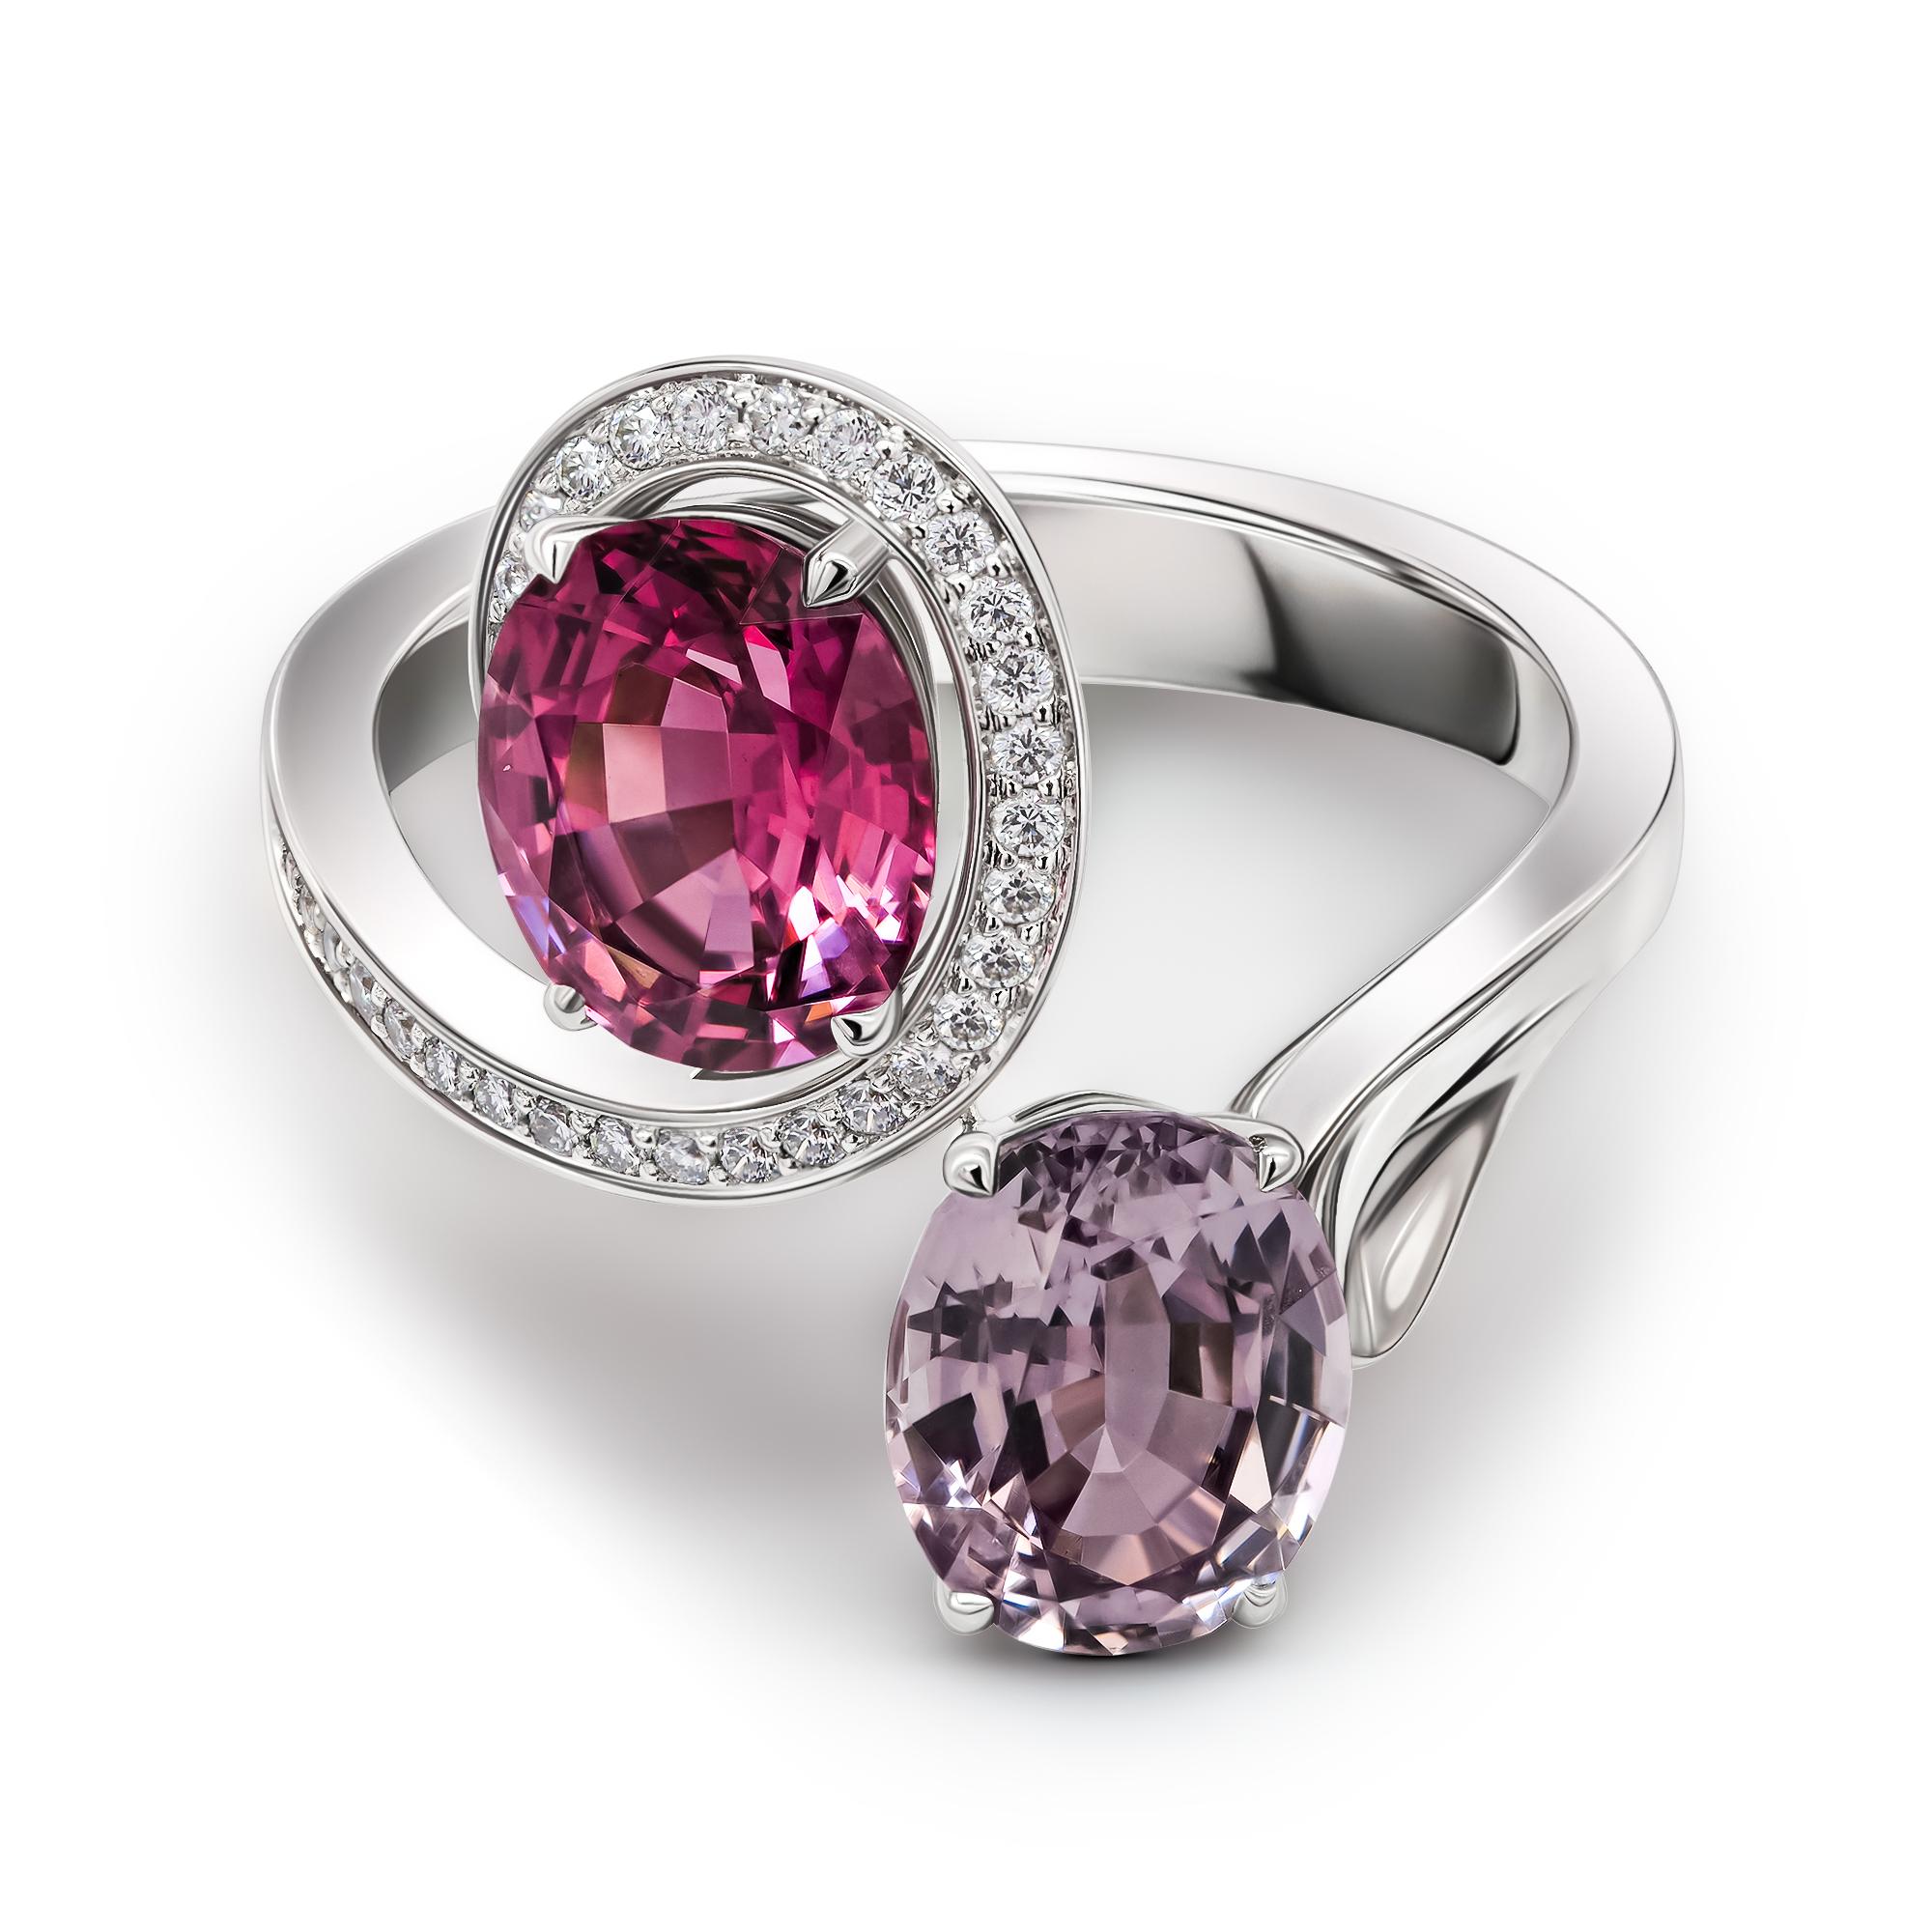 •	18K white gold.  
•	Raspberry Spinel in oval cut - total carat weight 1.79. 
•	Lavender Spinel in oval cut - total carat weight 1.84.  
•	Diamonds – 33 pc in round cut, total carat weight 0.15.
•	Ring size – 7’.
•	Product weight – 5.88 grams.
